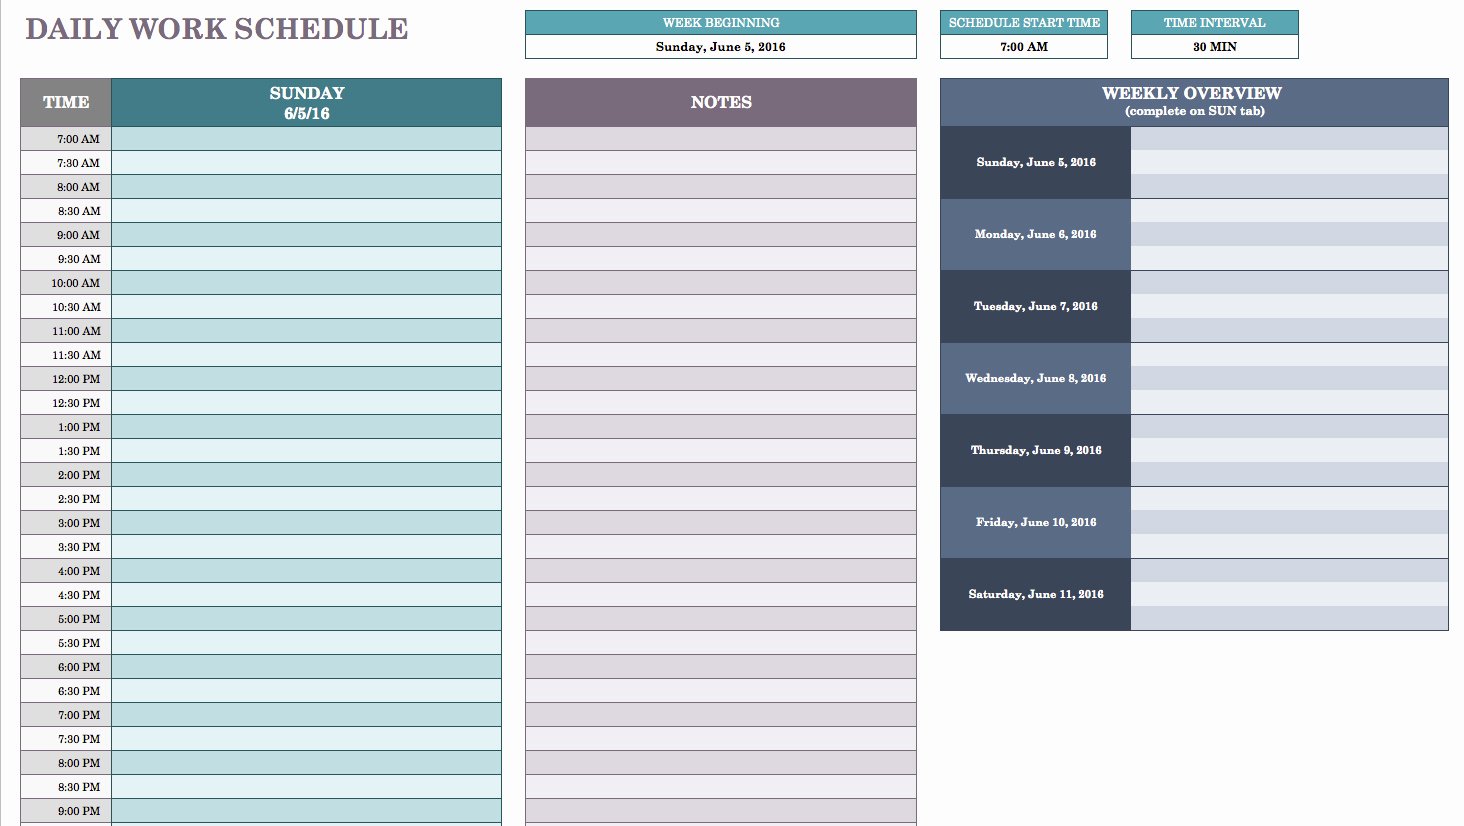 Daily Work Schedule Template Best Of Free Daily Schedule Templates for Excel Smartsheet